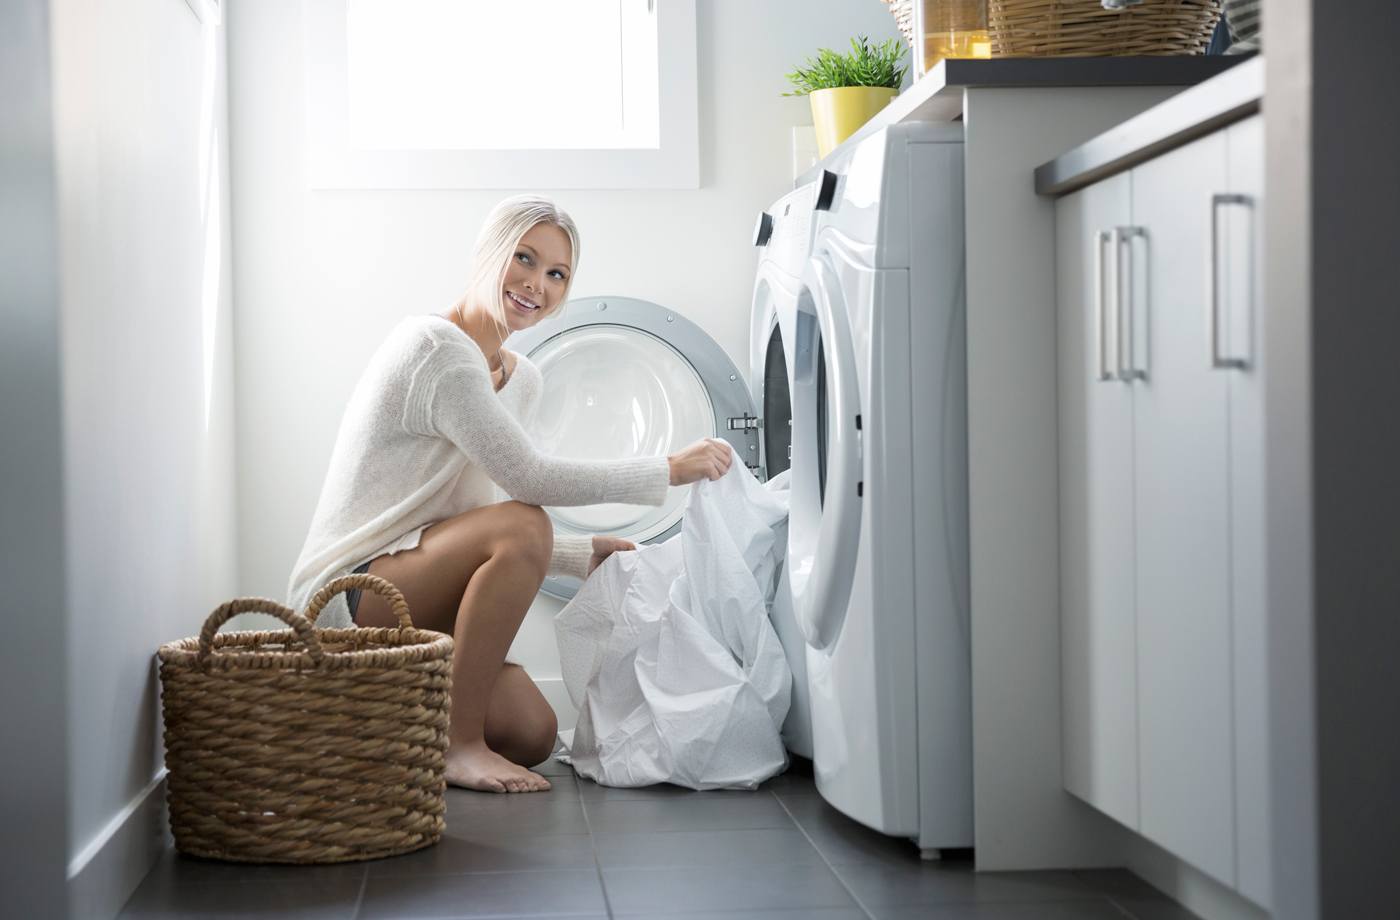 Laundry Bleach vs Laundry Whitener: Which Is Better For Your Clothes? –  Washroom Laundry